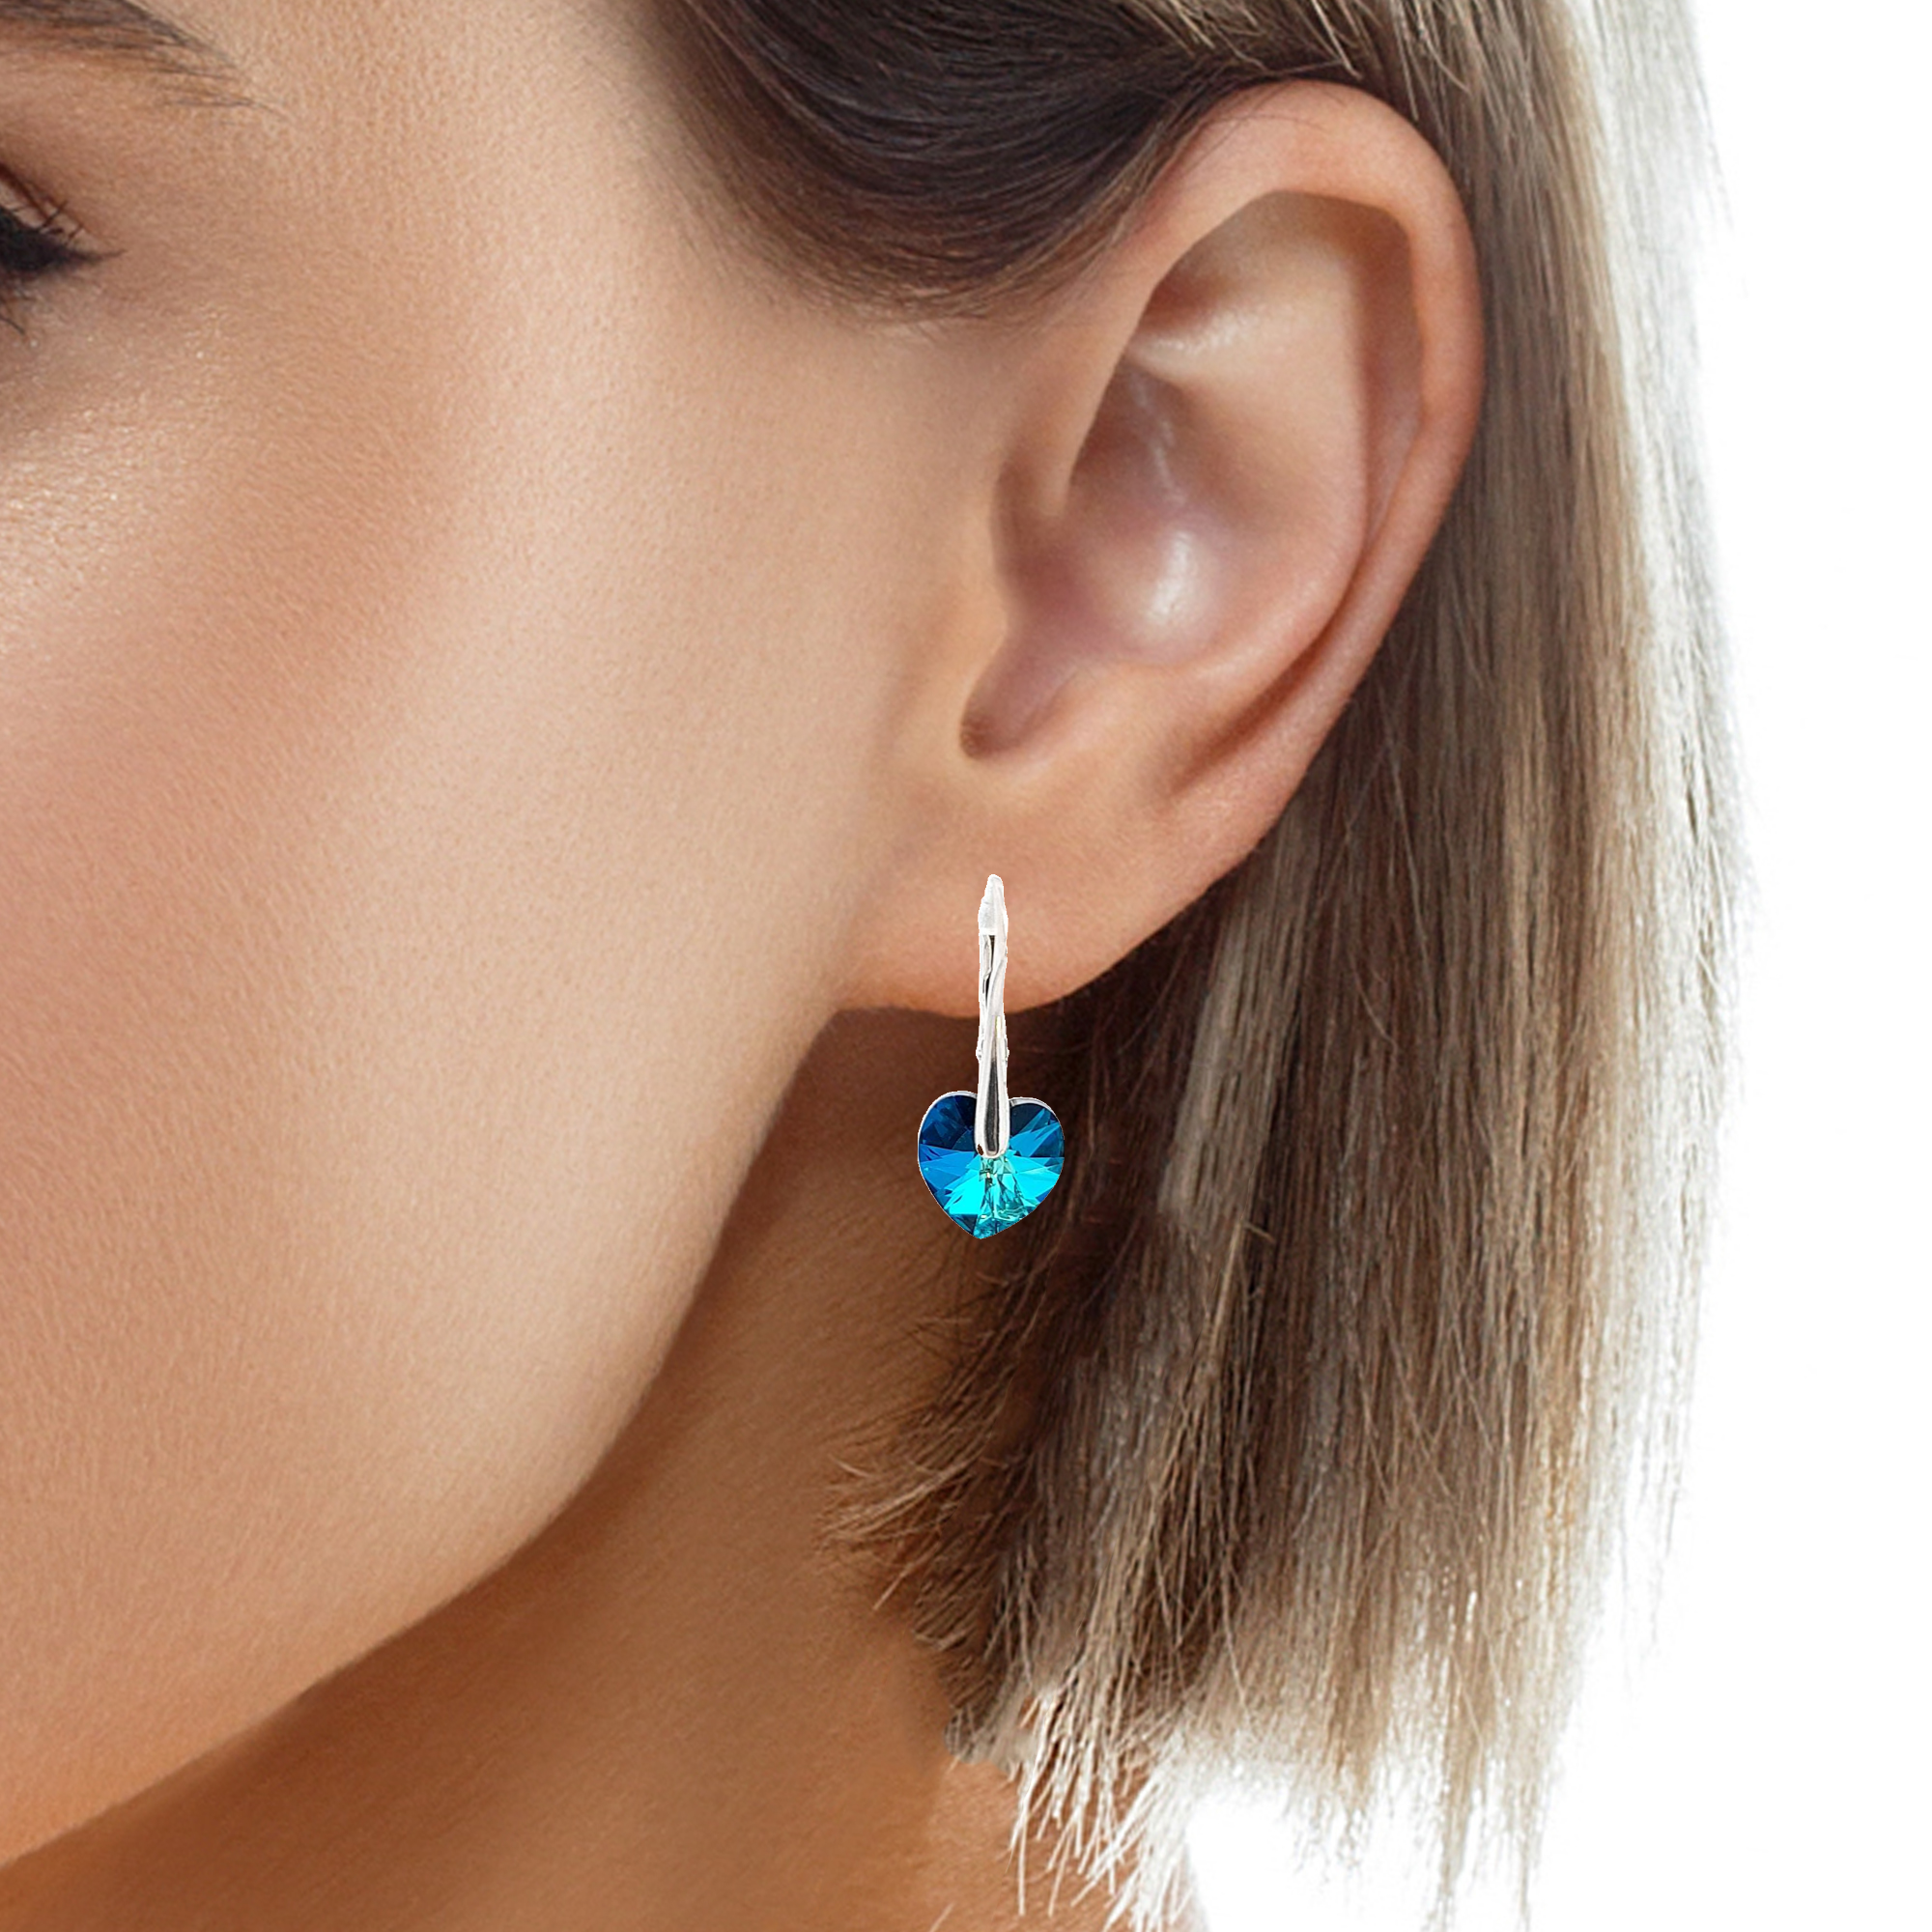 Elegant Woman Wearing Bermuda Blue Dainty Heart Earrings - Reflecting the Serenity and Beauty of the Sea